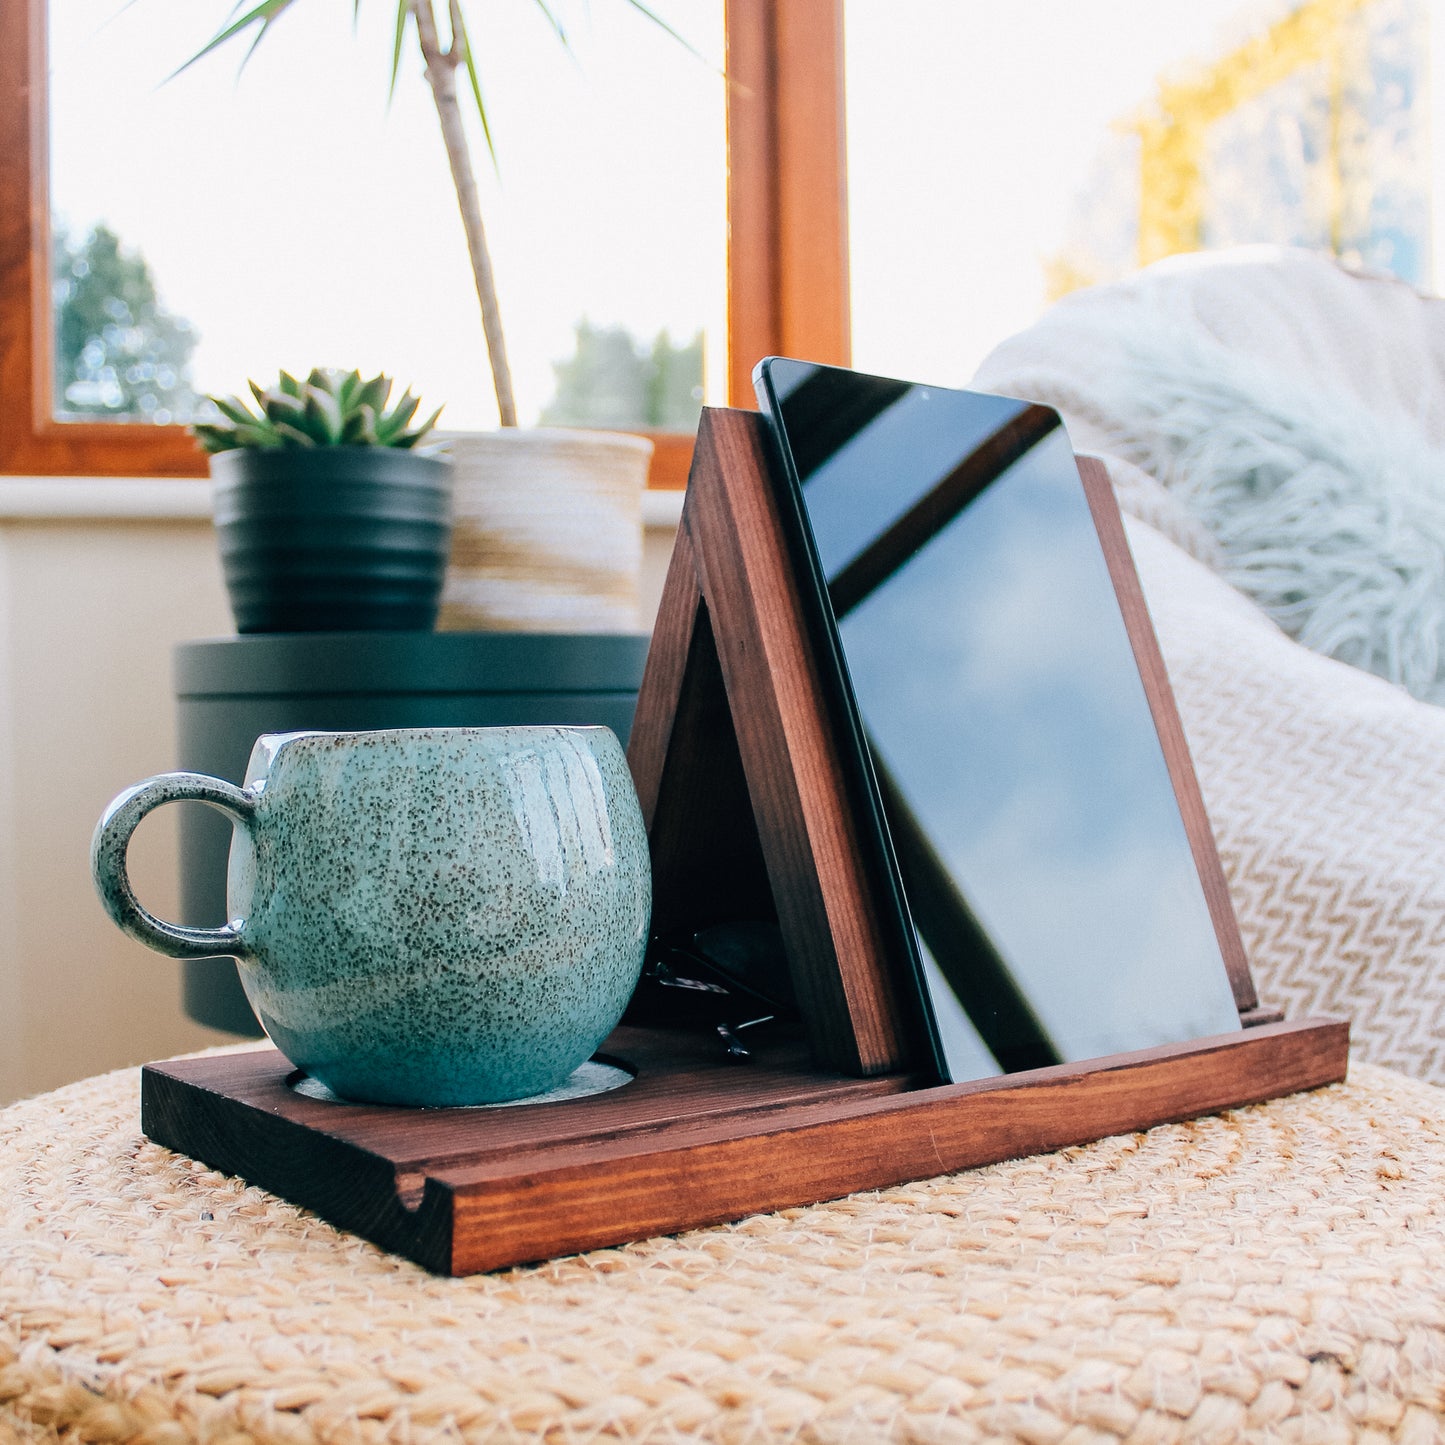 Close-up of a dark wooden book valet showcasing its functionality with an tablet or kindle device resting against it and a mug of tea